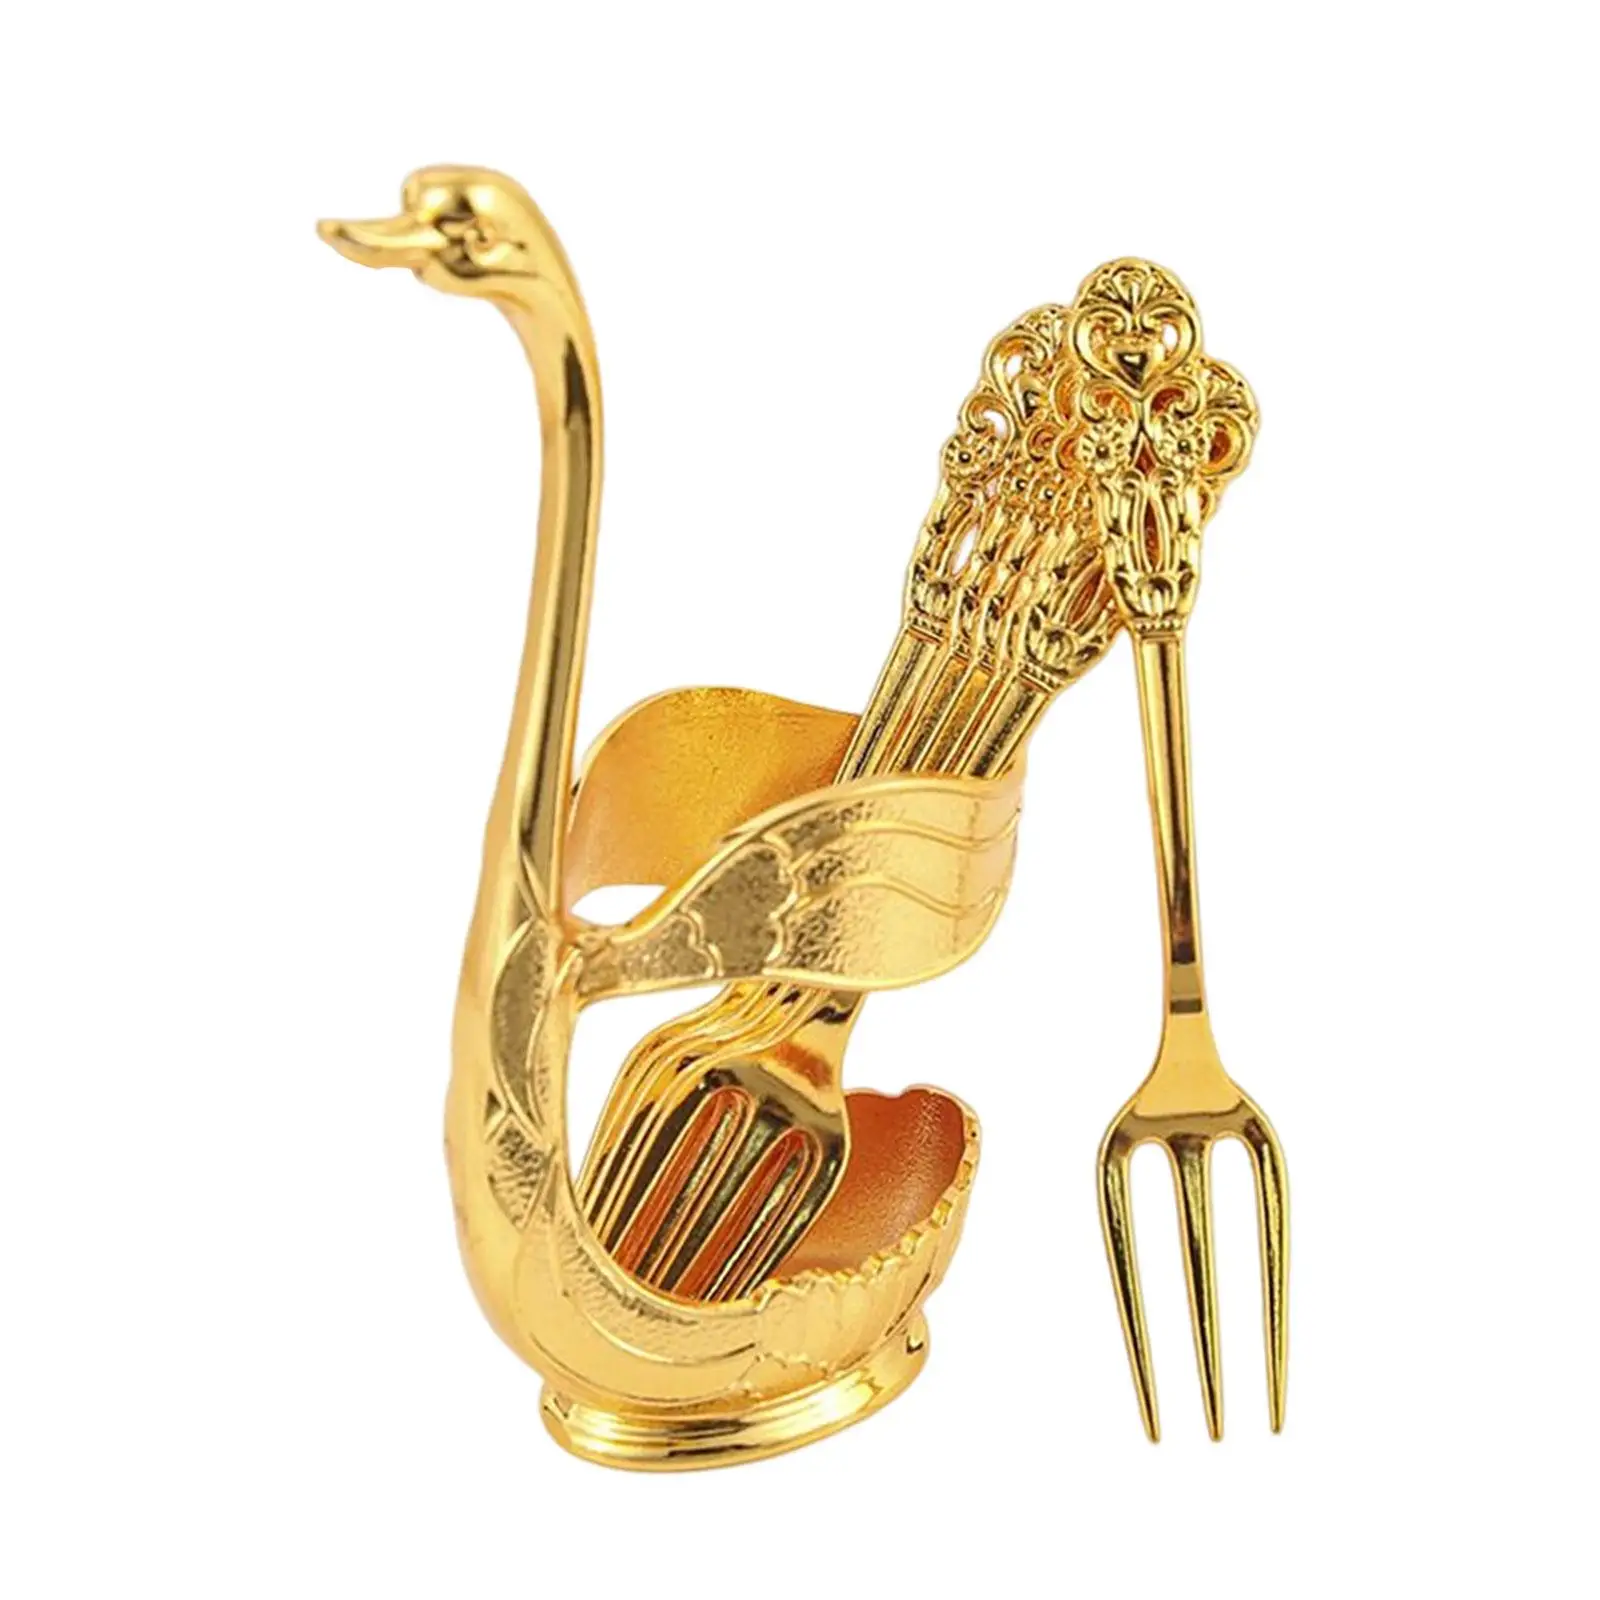 Creative Decorative Swan Base Holder Cutlery Appetizer Forks Teaspoons Coffee Spoons Holder for Restaurant Birthday Party Decor